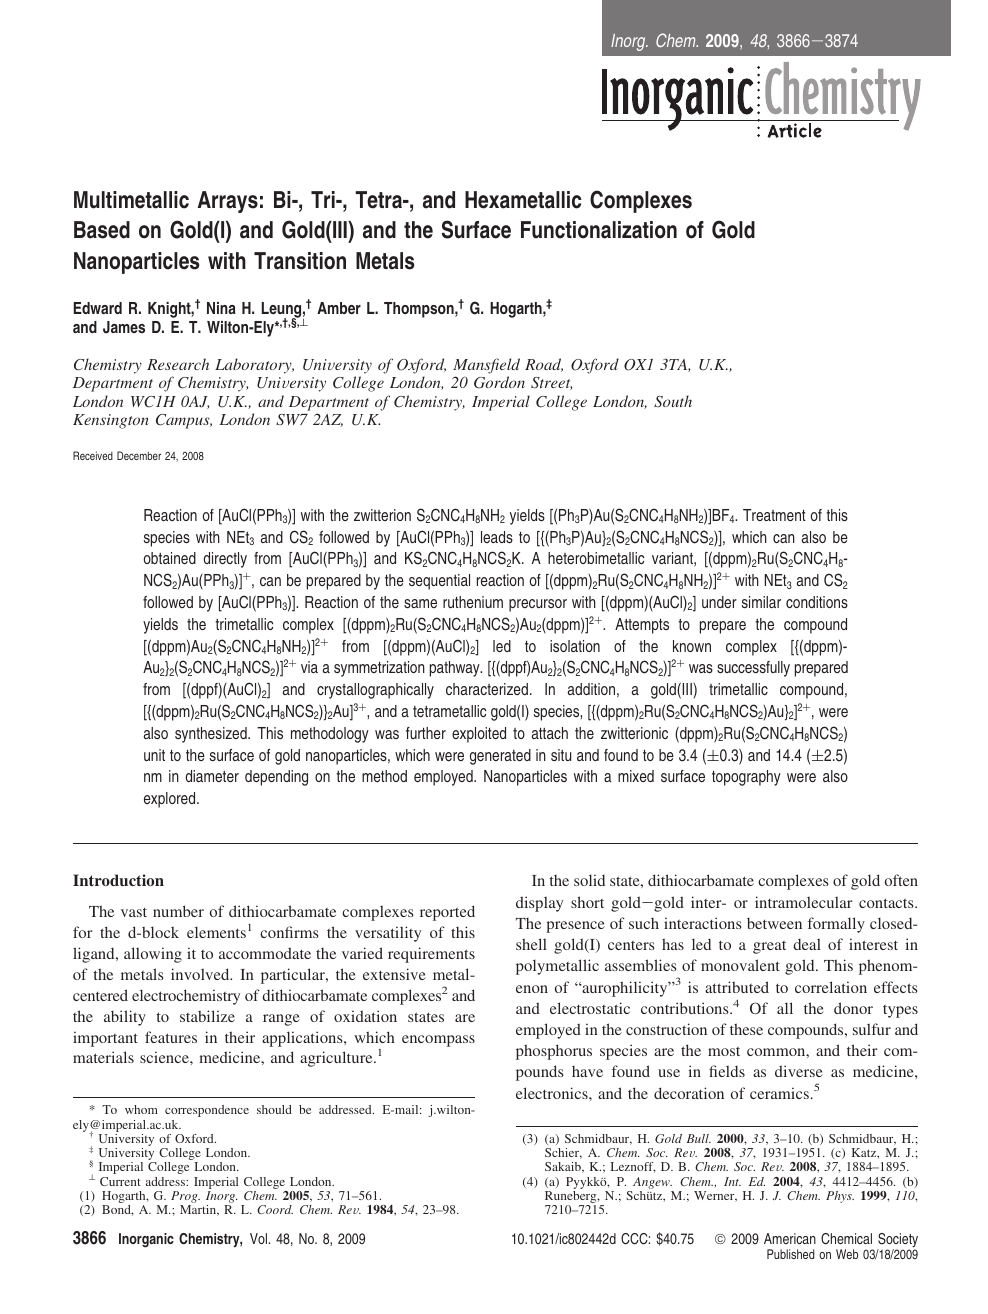 Multimetallic Arrays Bi Tri Tetra And Hexametallic Complexes Based On Gold I And Gold Iii And The Surface Functionalization Of Gold Nanoparticles With Transition Metals Topic Of Research Paper In Chemical Sciences Download